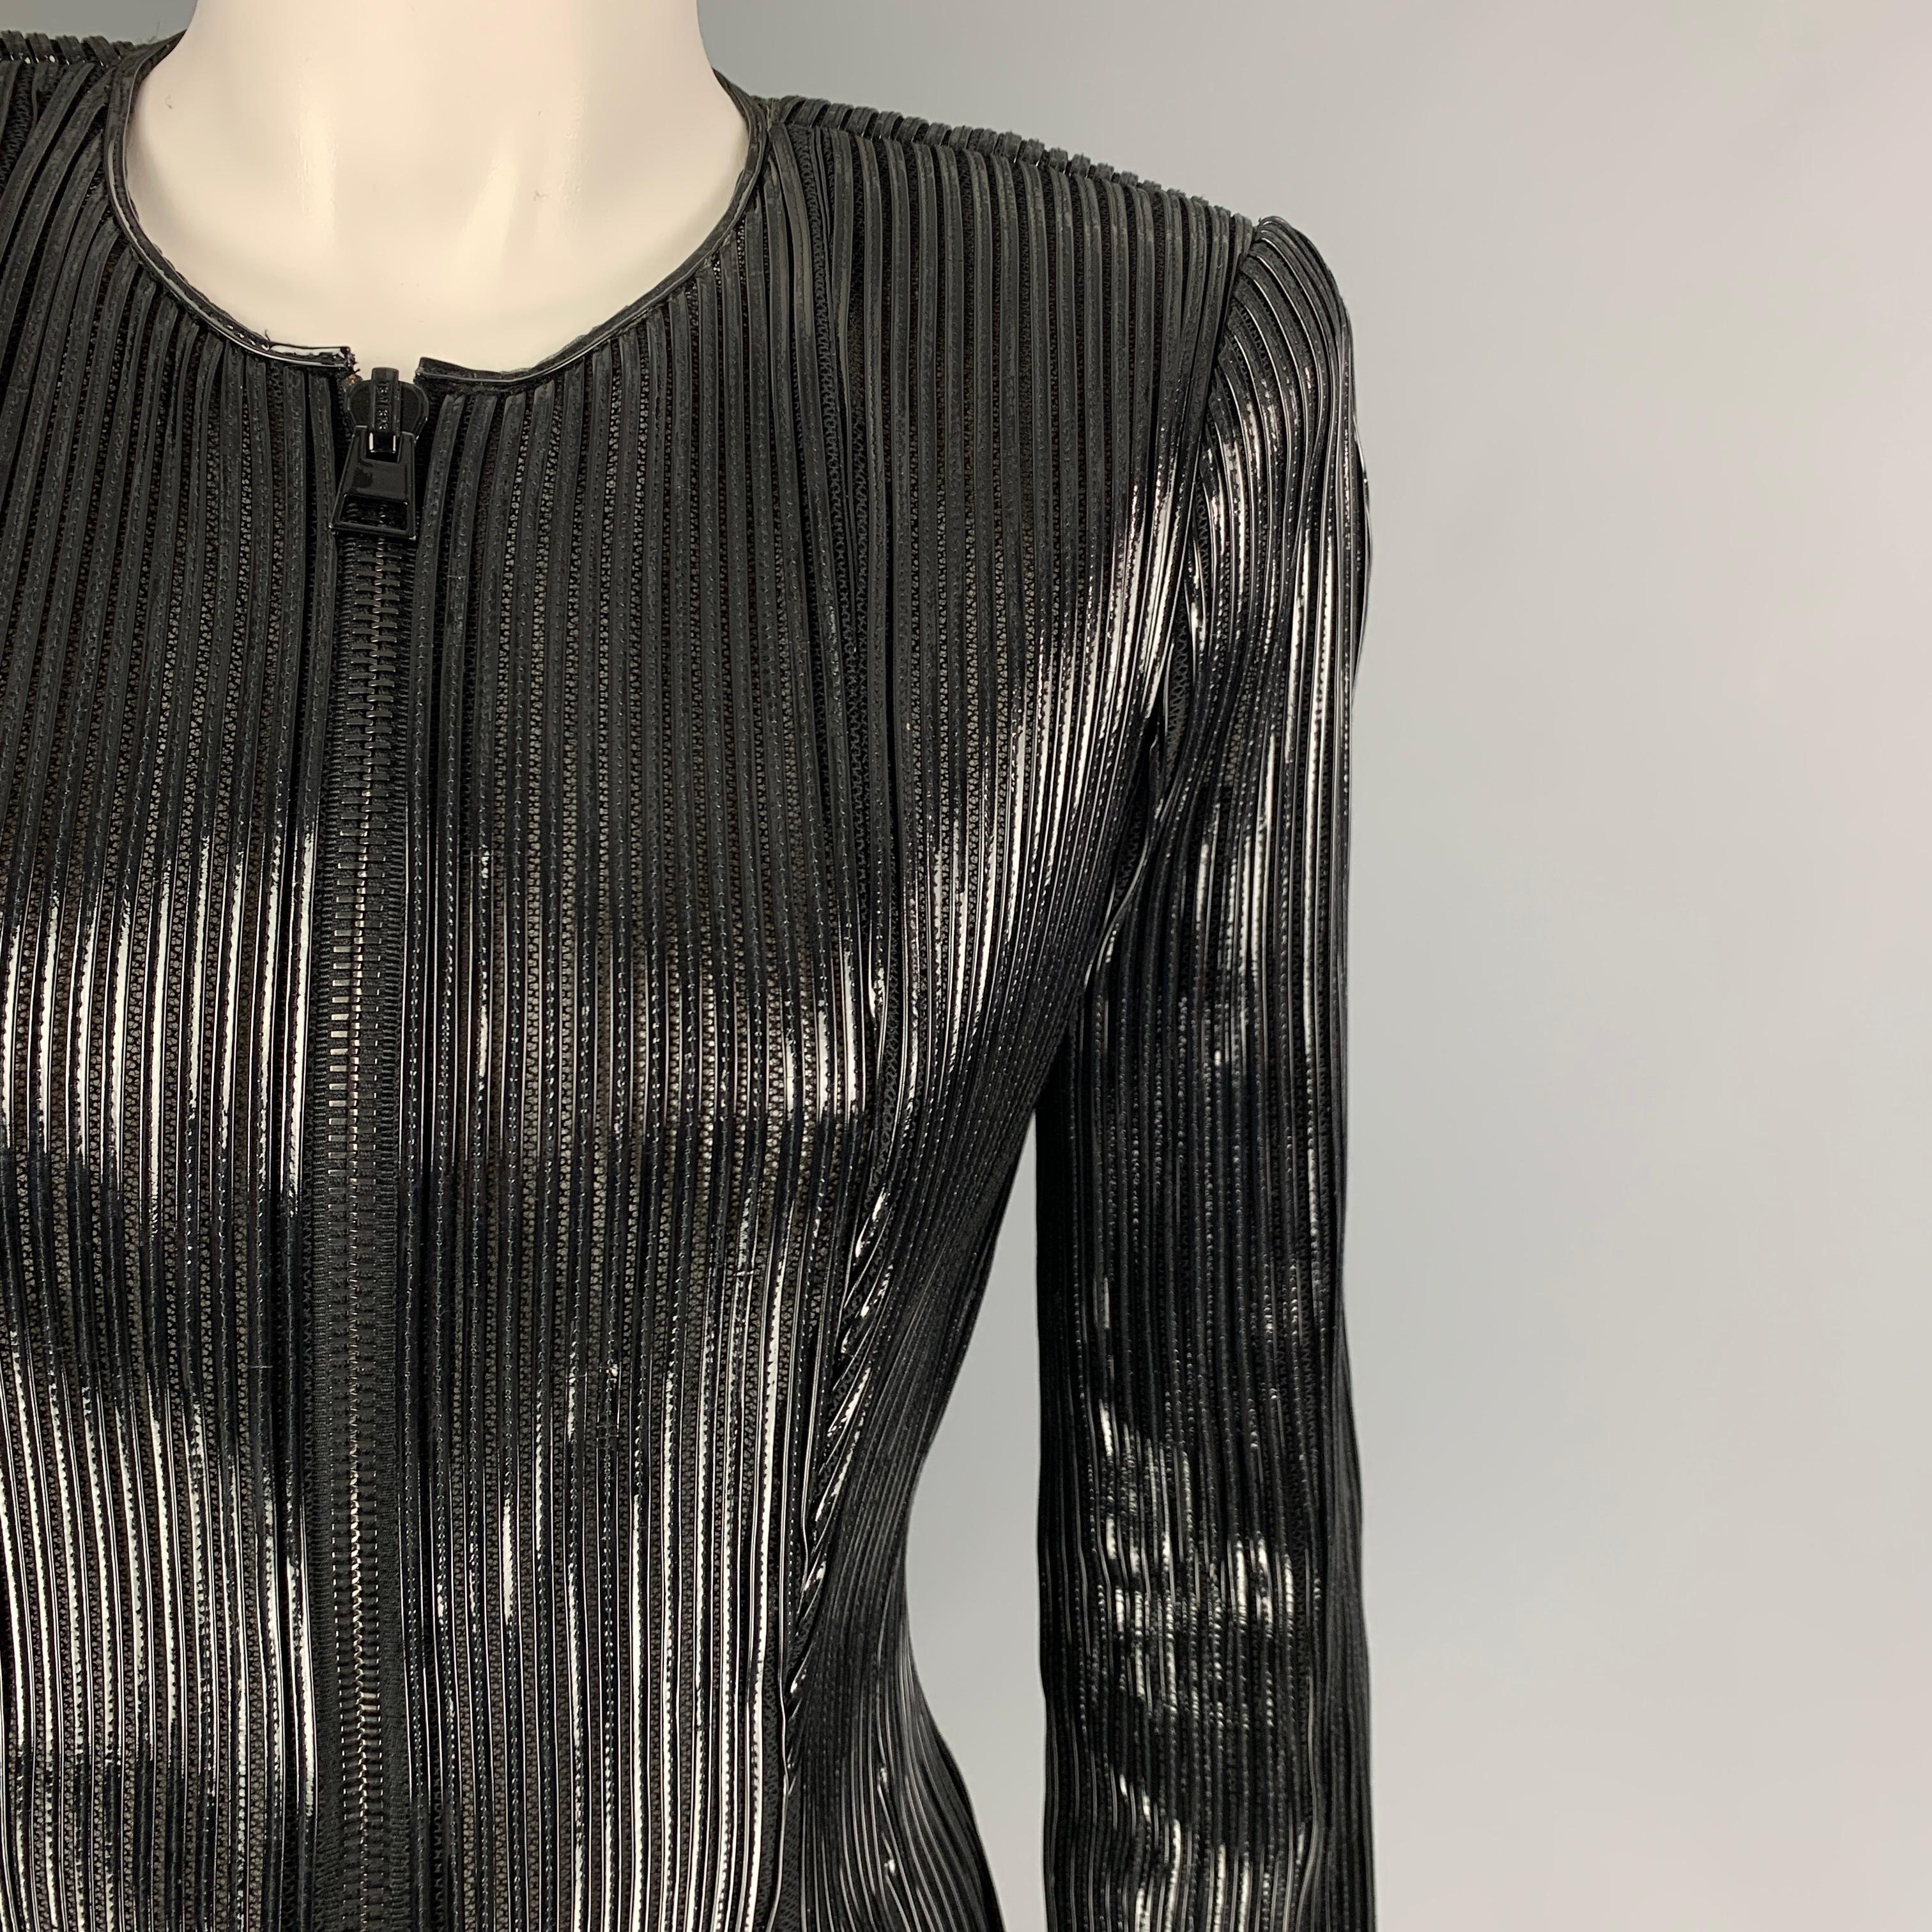 TOM FORD jacket comes in a black silk / cotton featuring a leather ribbed design, collarless, shoulder pads, and a full zip up closure. Made in Italy. 

Excellent Pre-Owned Condition.
Marked: 42

Measurements:

Shoulder: 15.5 in.
Bust: 32